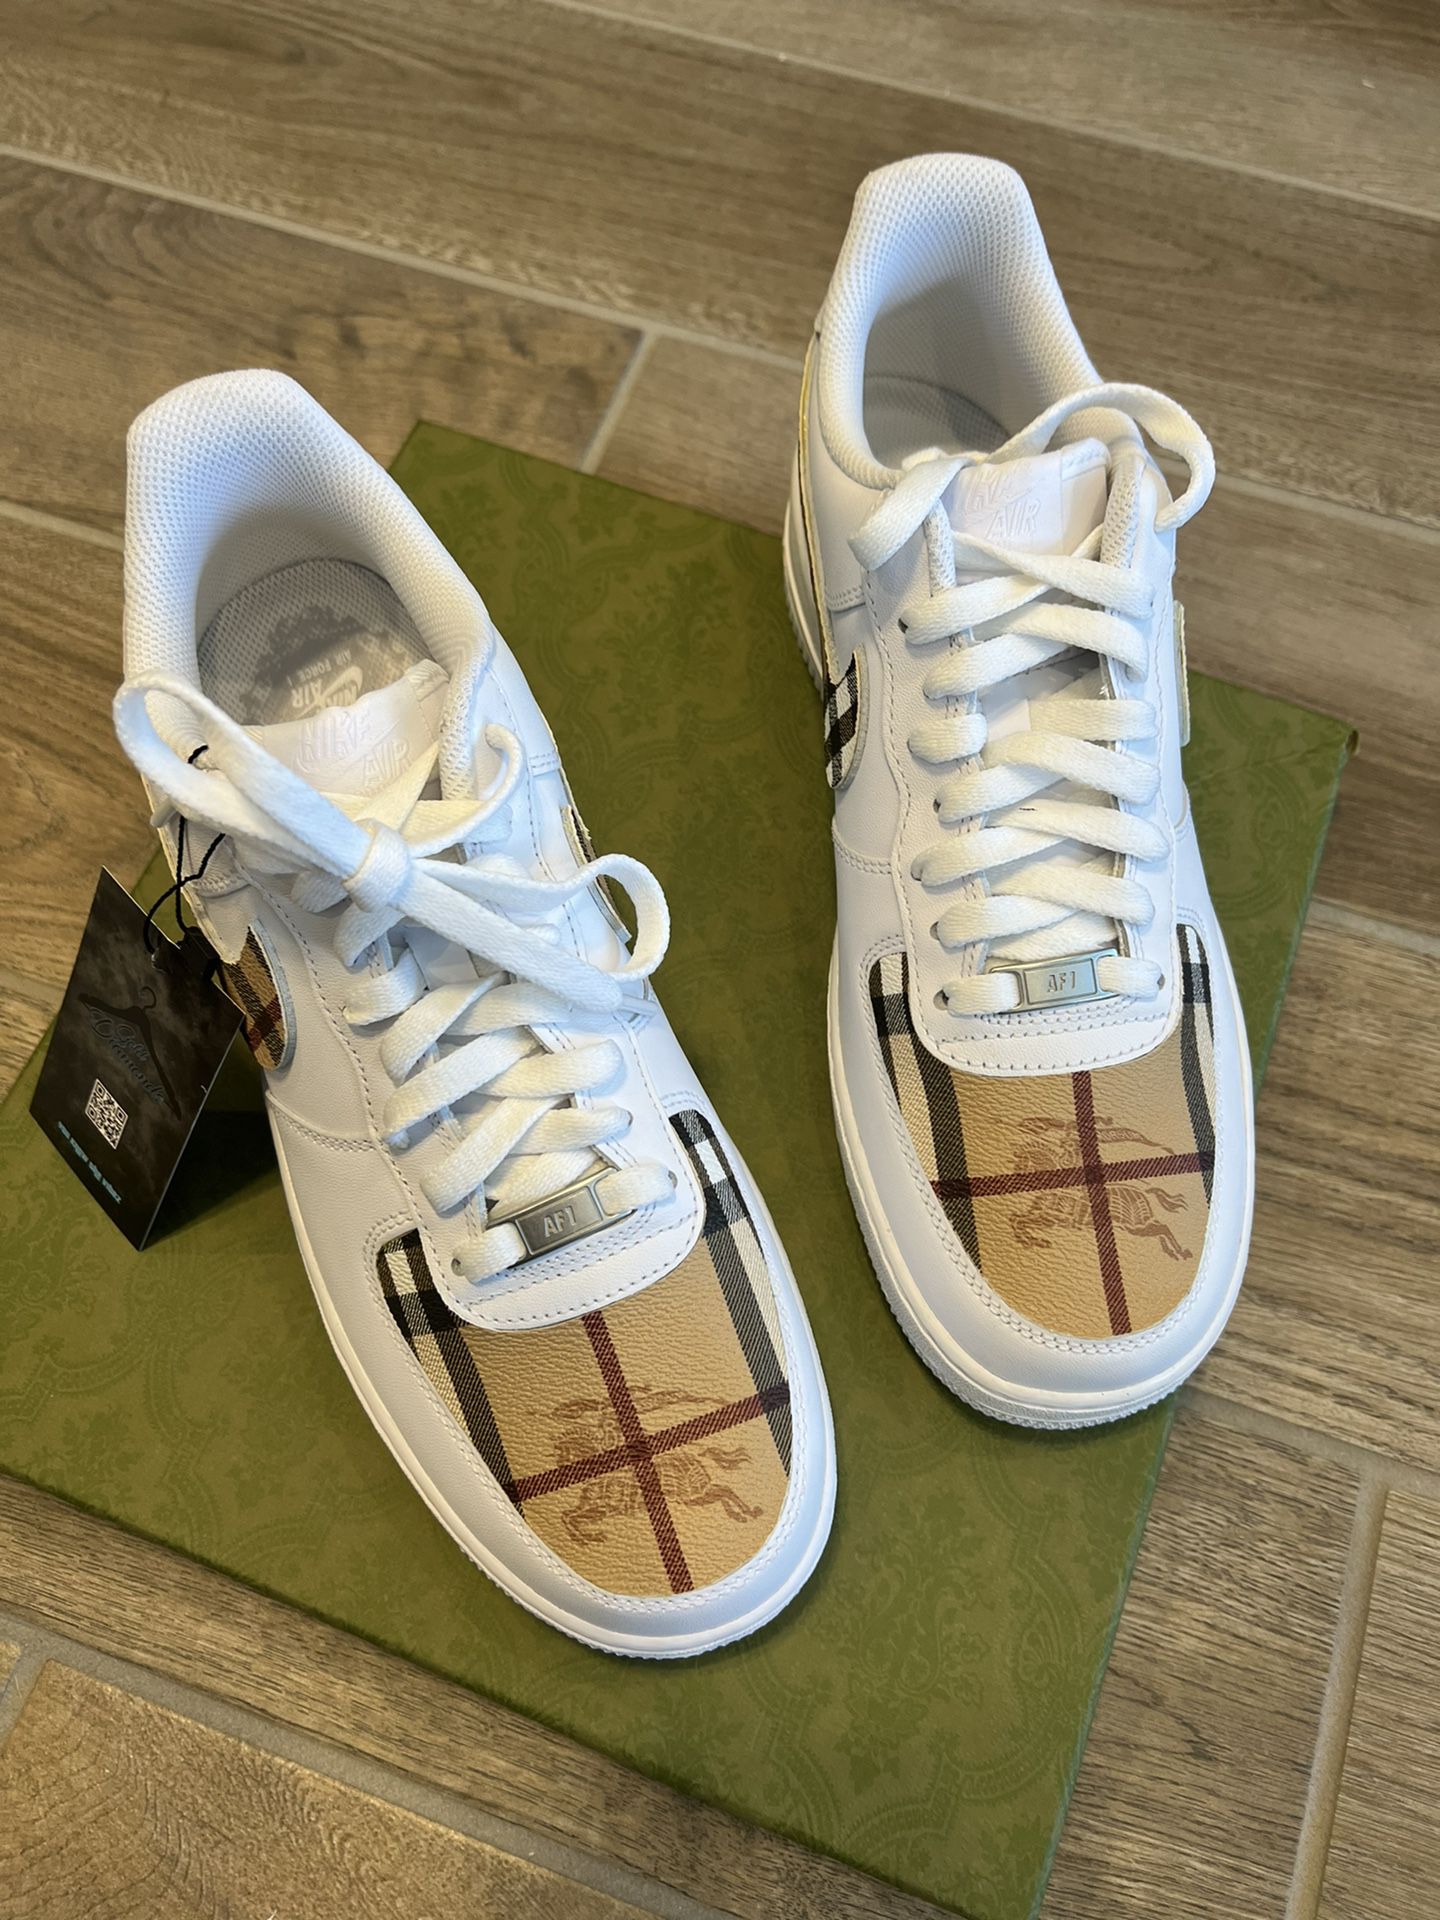 Nike Air Force 1s Burberry 2.0